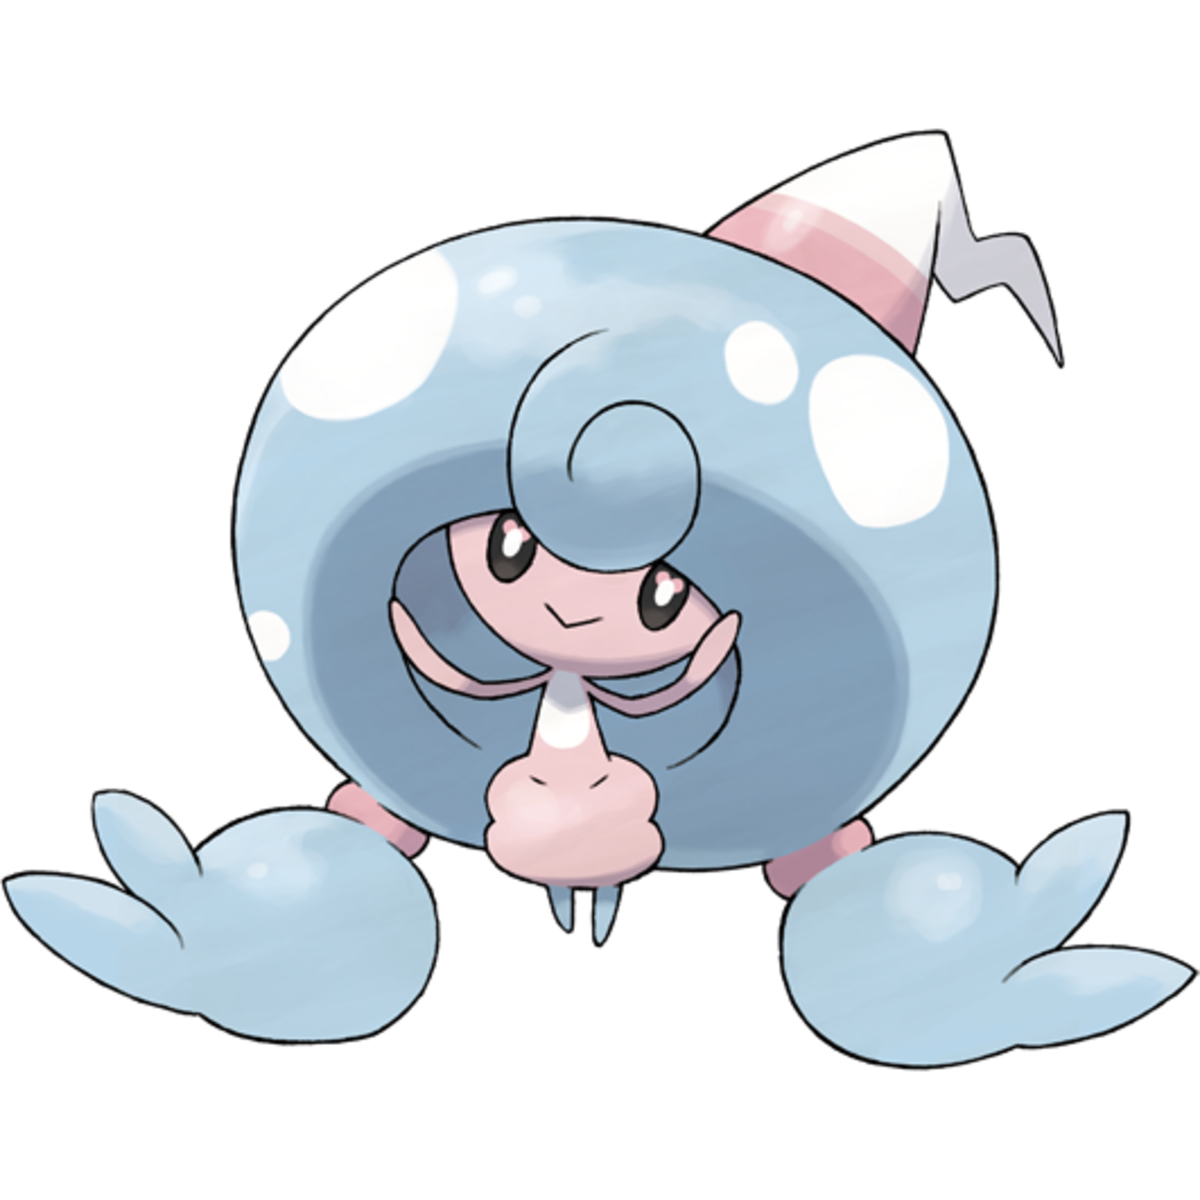 No matter who you are, if you bring strong emotions around this Pokémon, it will silence you violently.